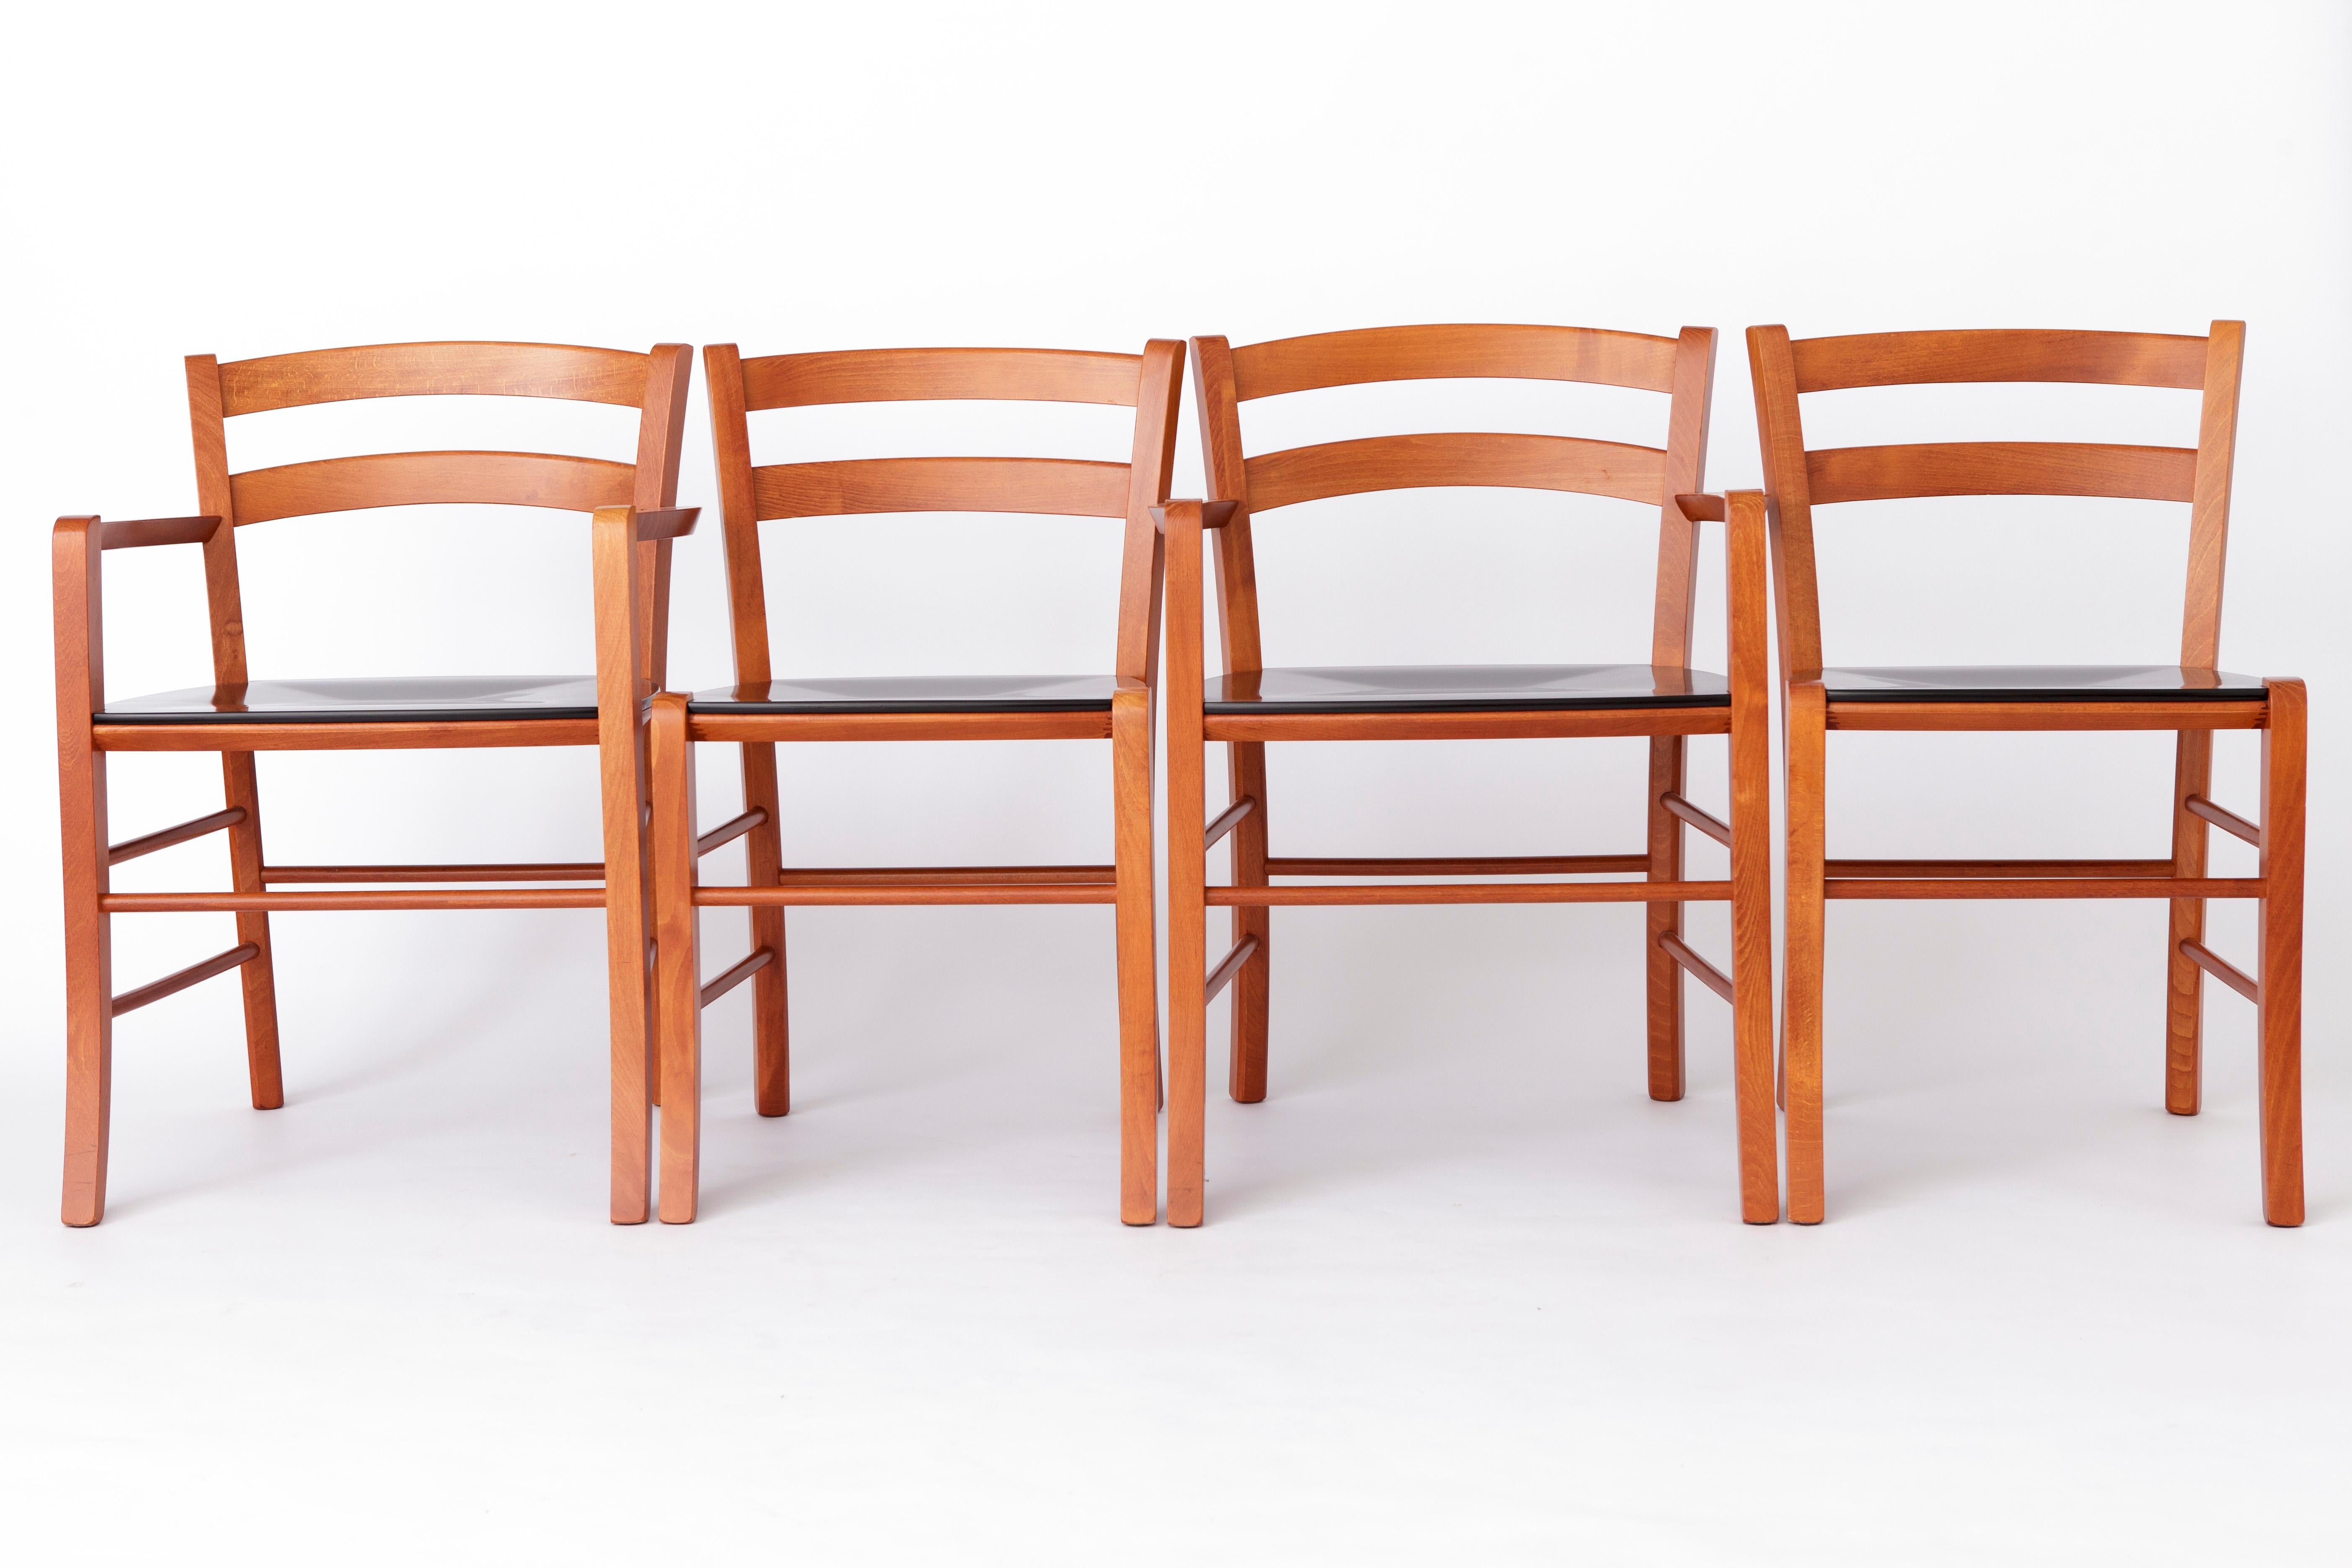 Set of 4 Italian Vintage chairs from the 1980s. 
Manufacturer: De Padova, Italy. Model: Marocca
Displayed price is for a set of 4. (2 armchairs + 2 side chairs). 

Sturdy beech wood frame. 
The seat is finished with black lacquer.
Wear consistent